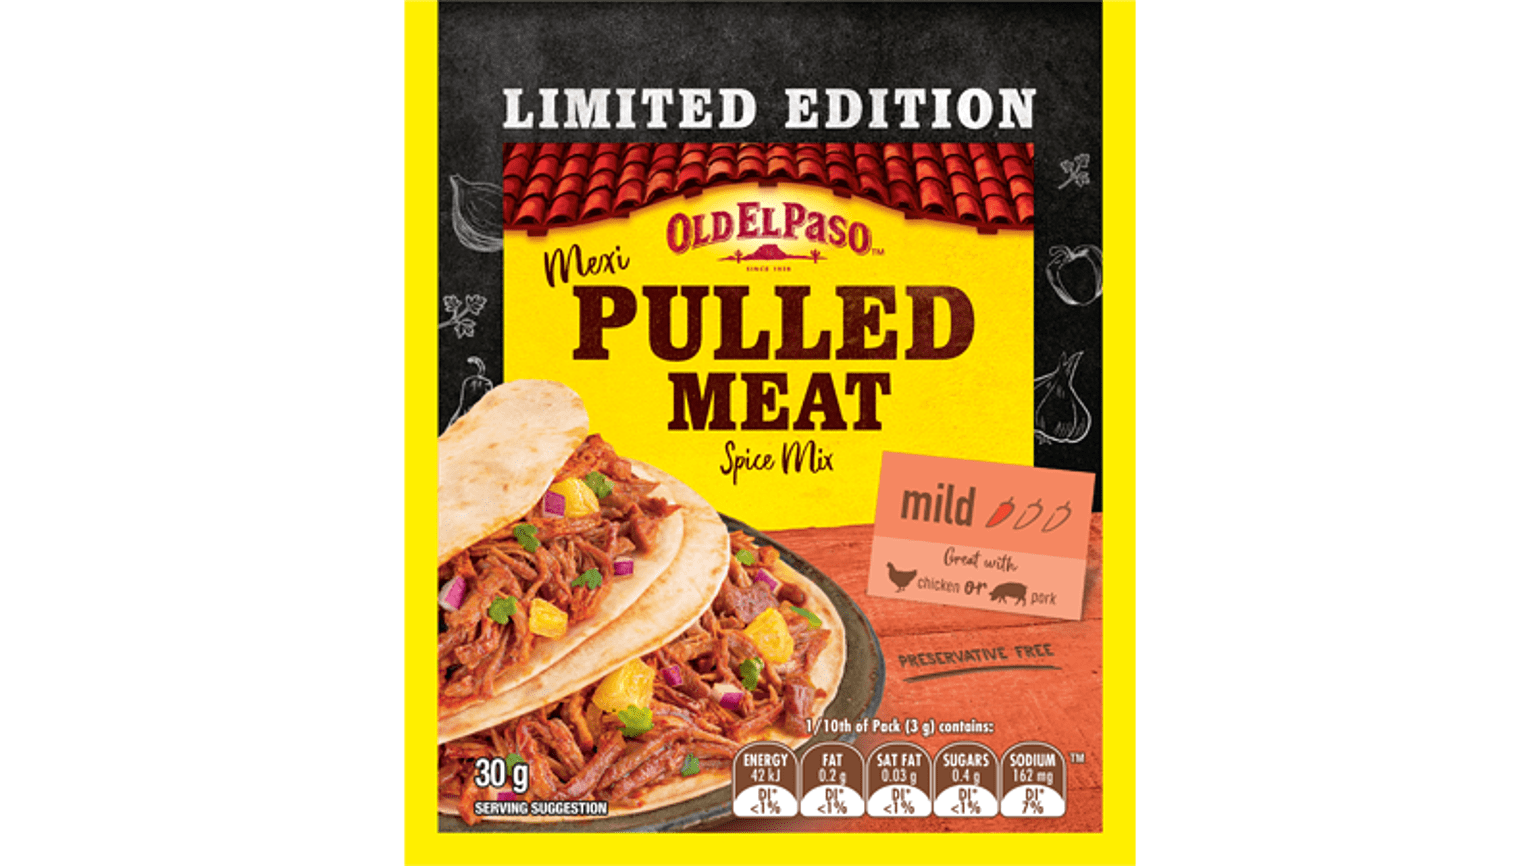 limited edition pack of Old El Paso's mexi pulled meat spice mix (30g)